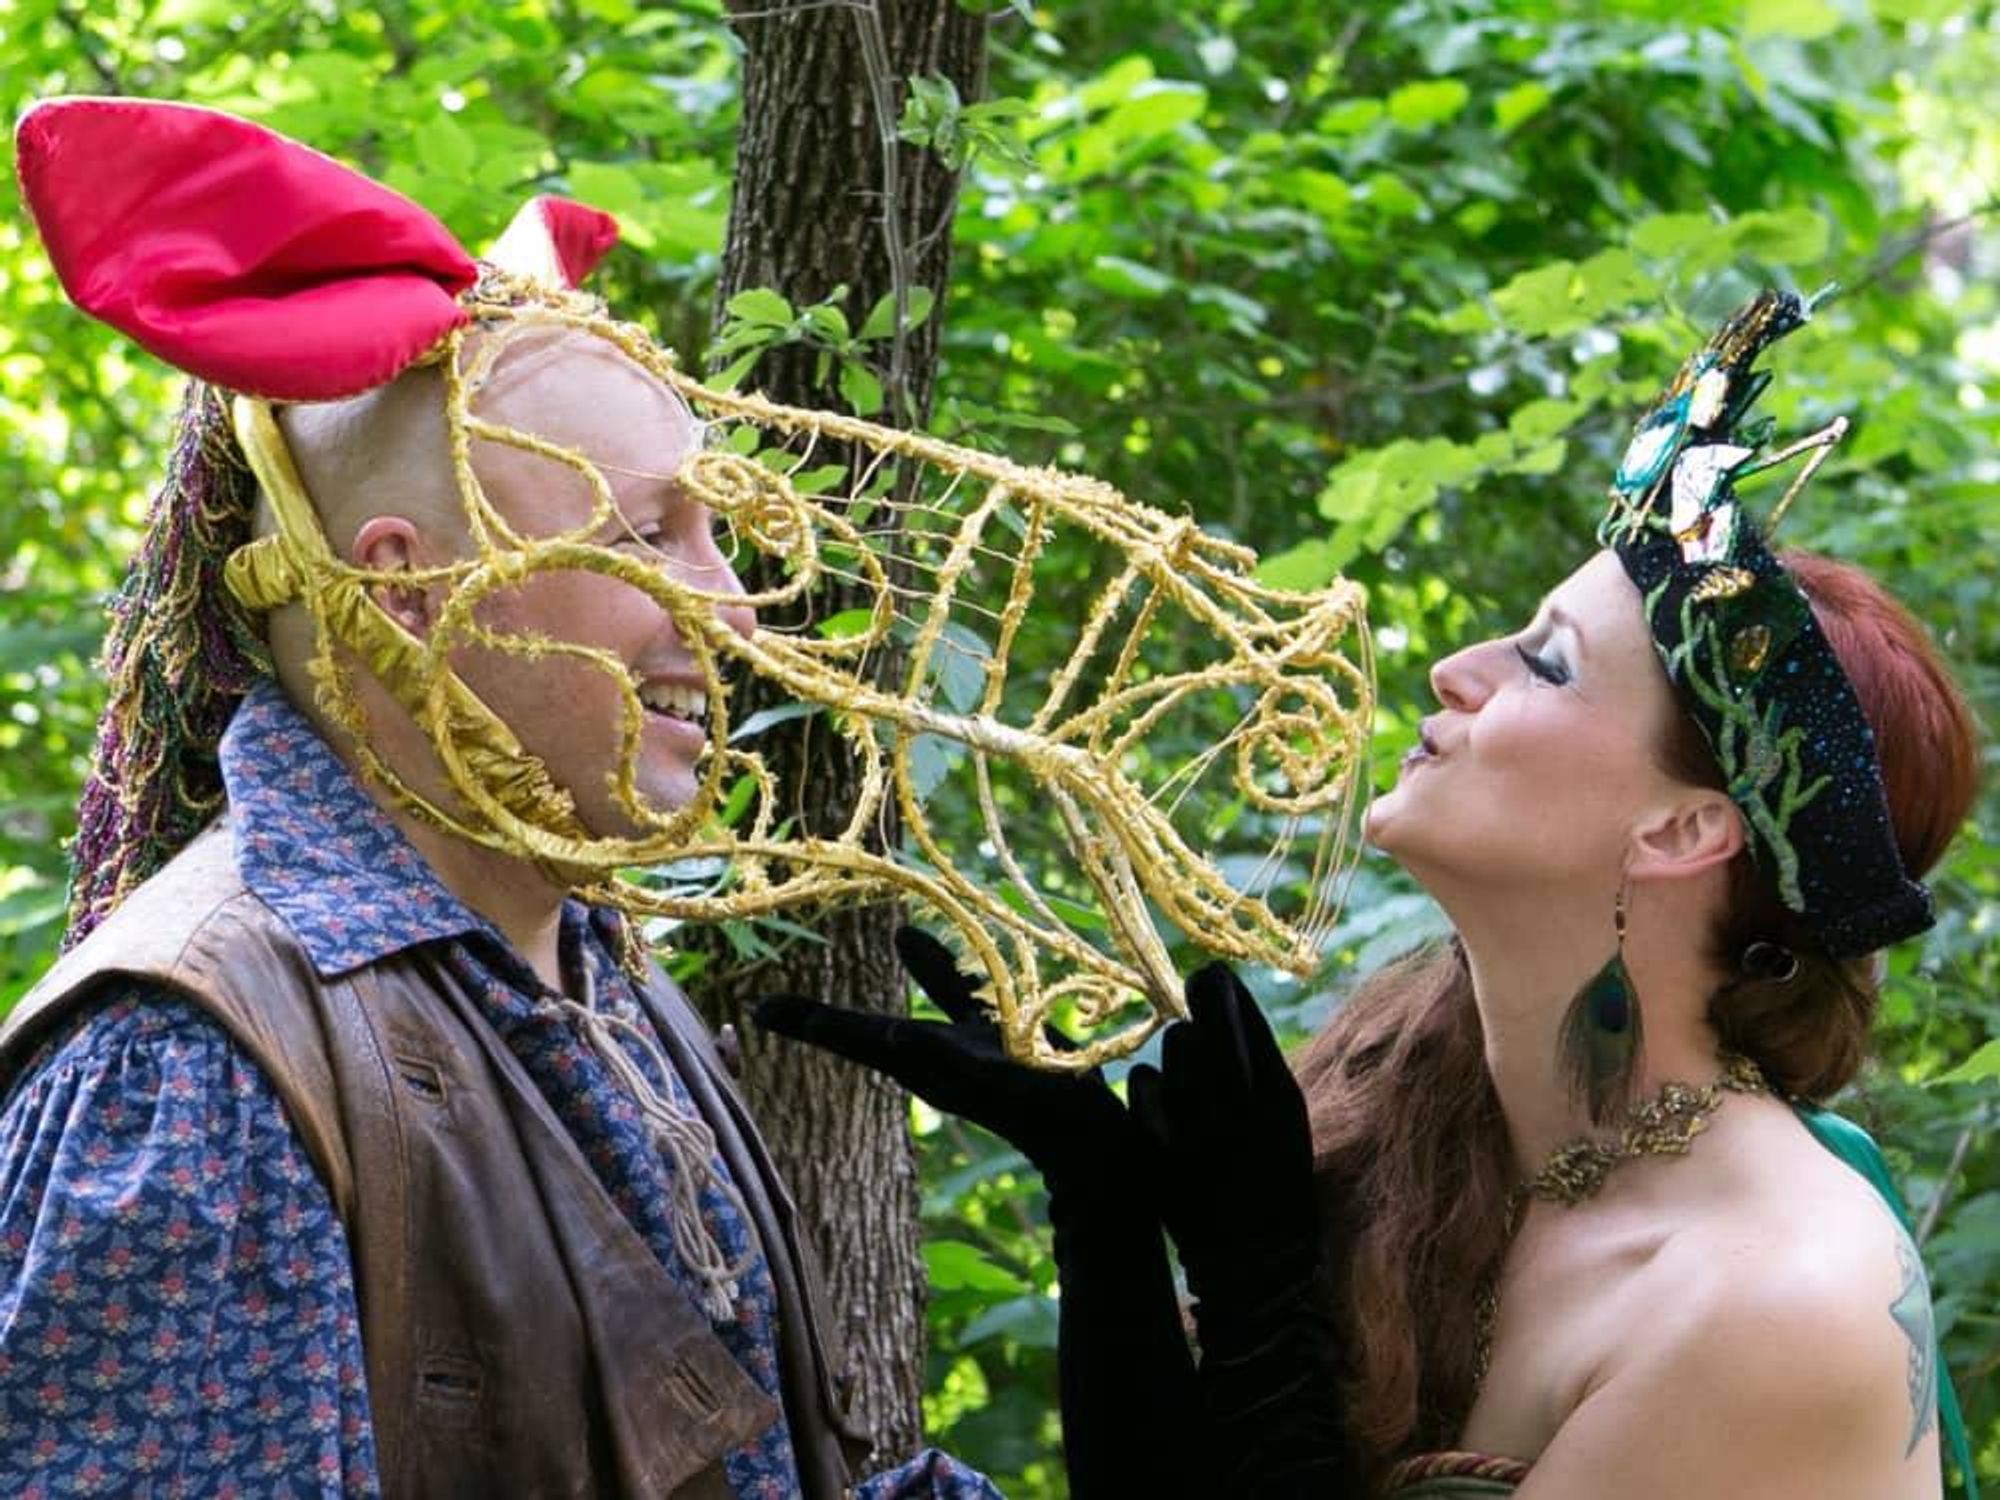 Shakespeare in the Park presents A Midsummer Night's Dream